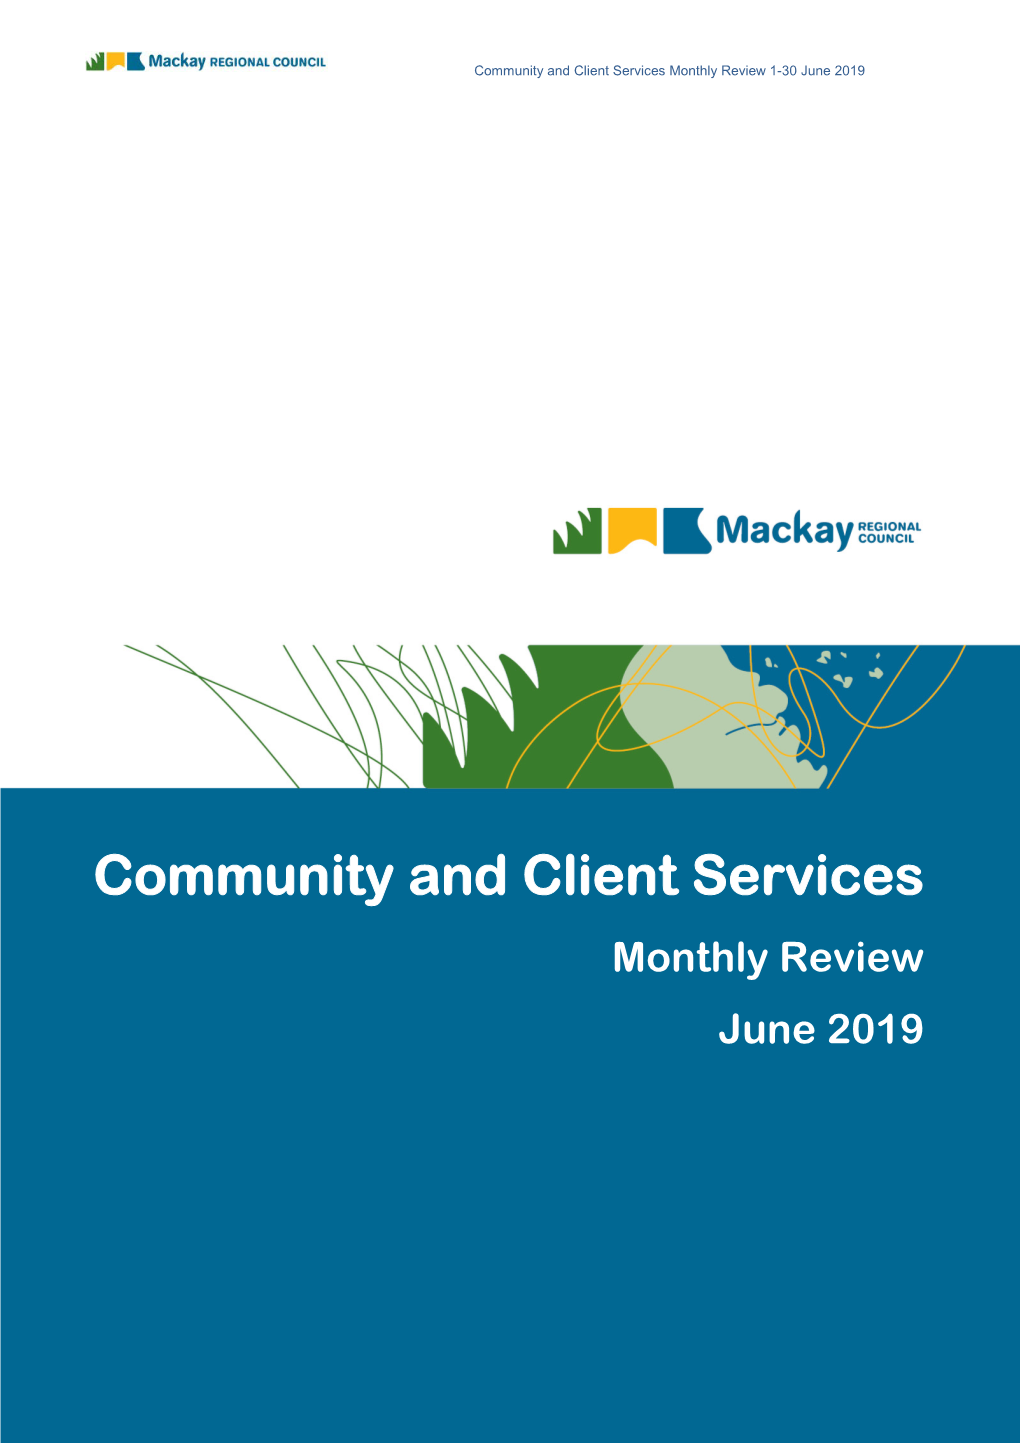 Community and Client Services Monthly Review 1-30 June 2019